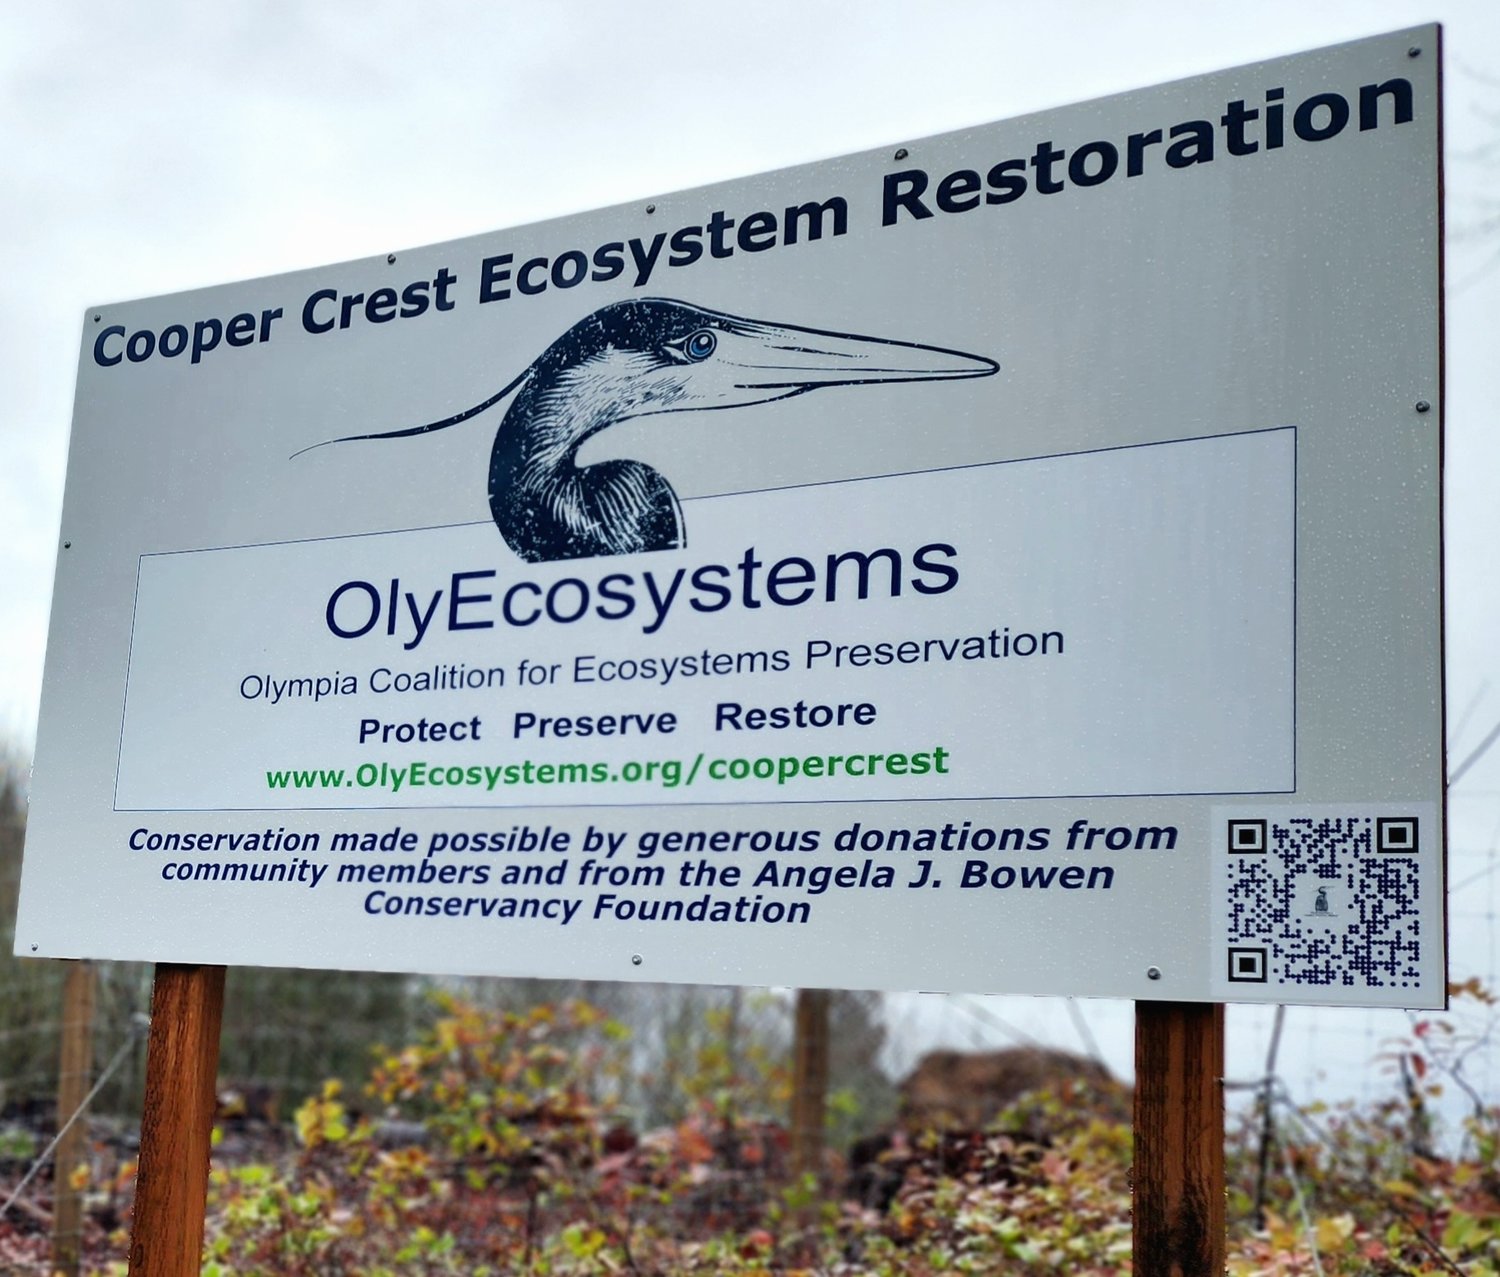 OlyEcosystems sign at the entrance to Cooper Crest.